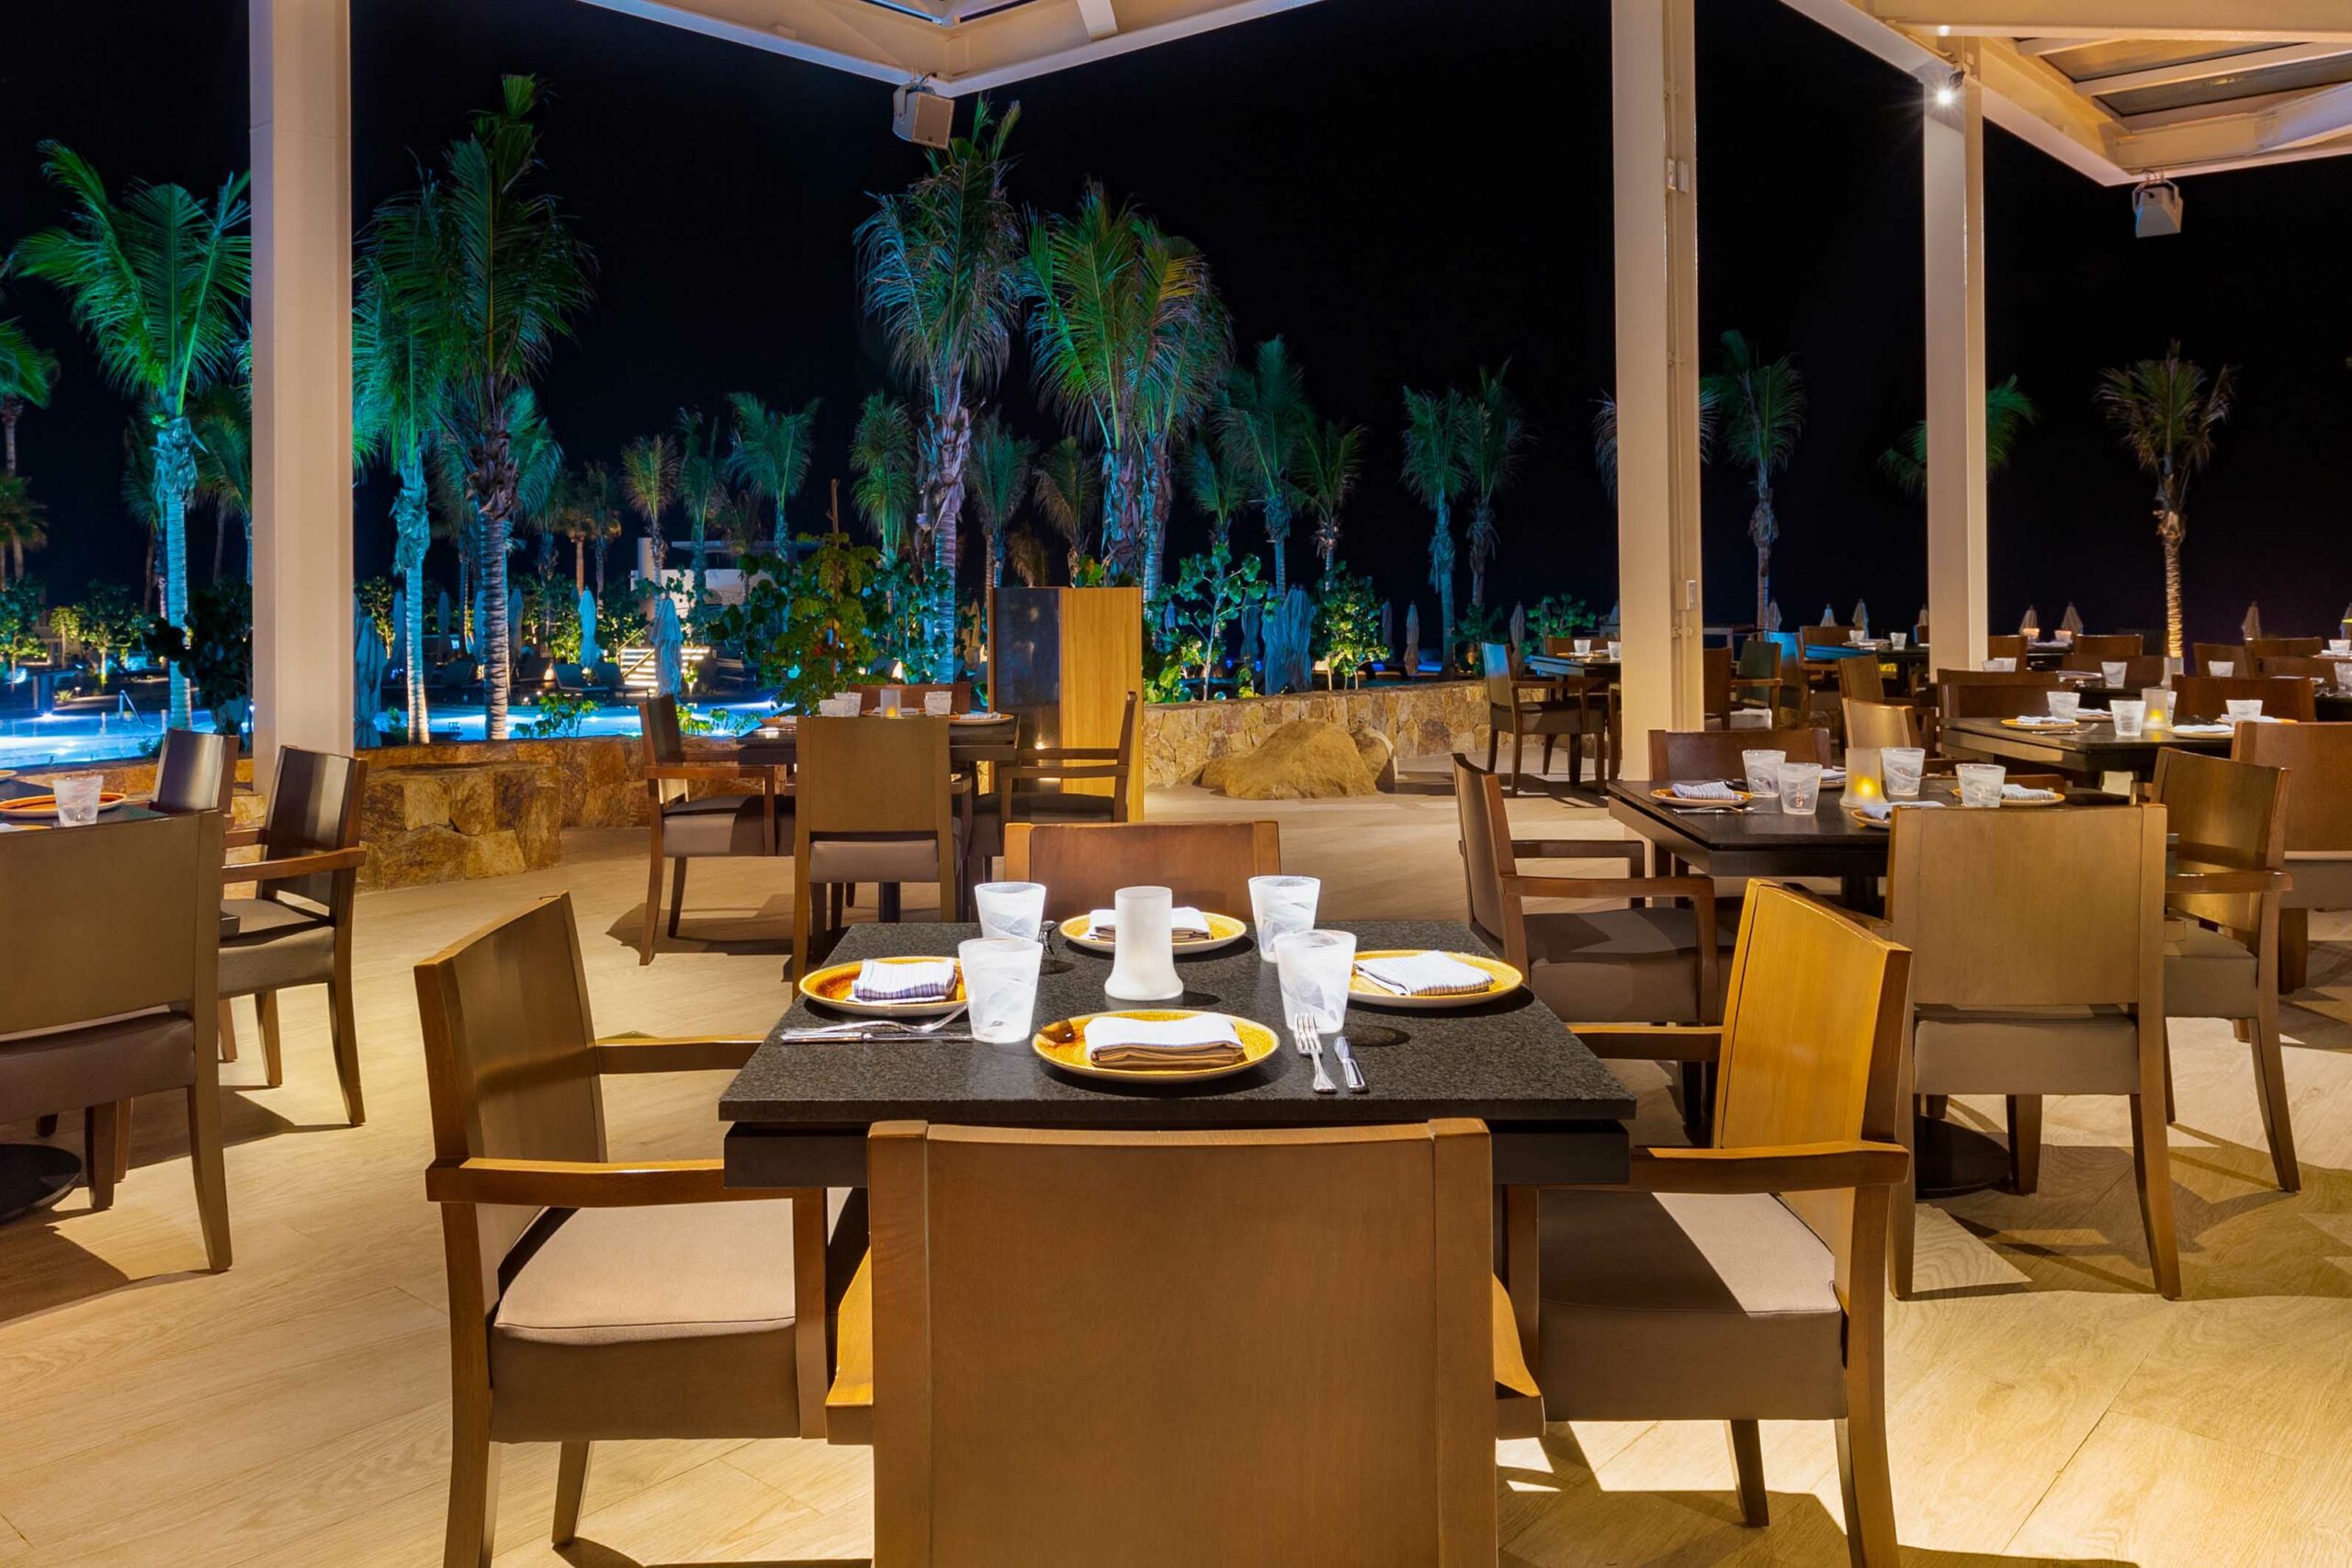 Fine dining Latitud 23.5 Steakhouse and Grill at Villa La Valencia with an evening view of the restaurant towards the pools.